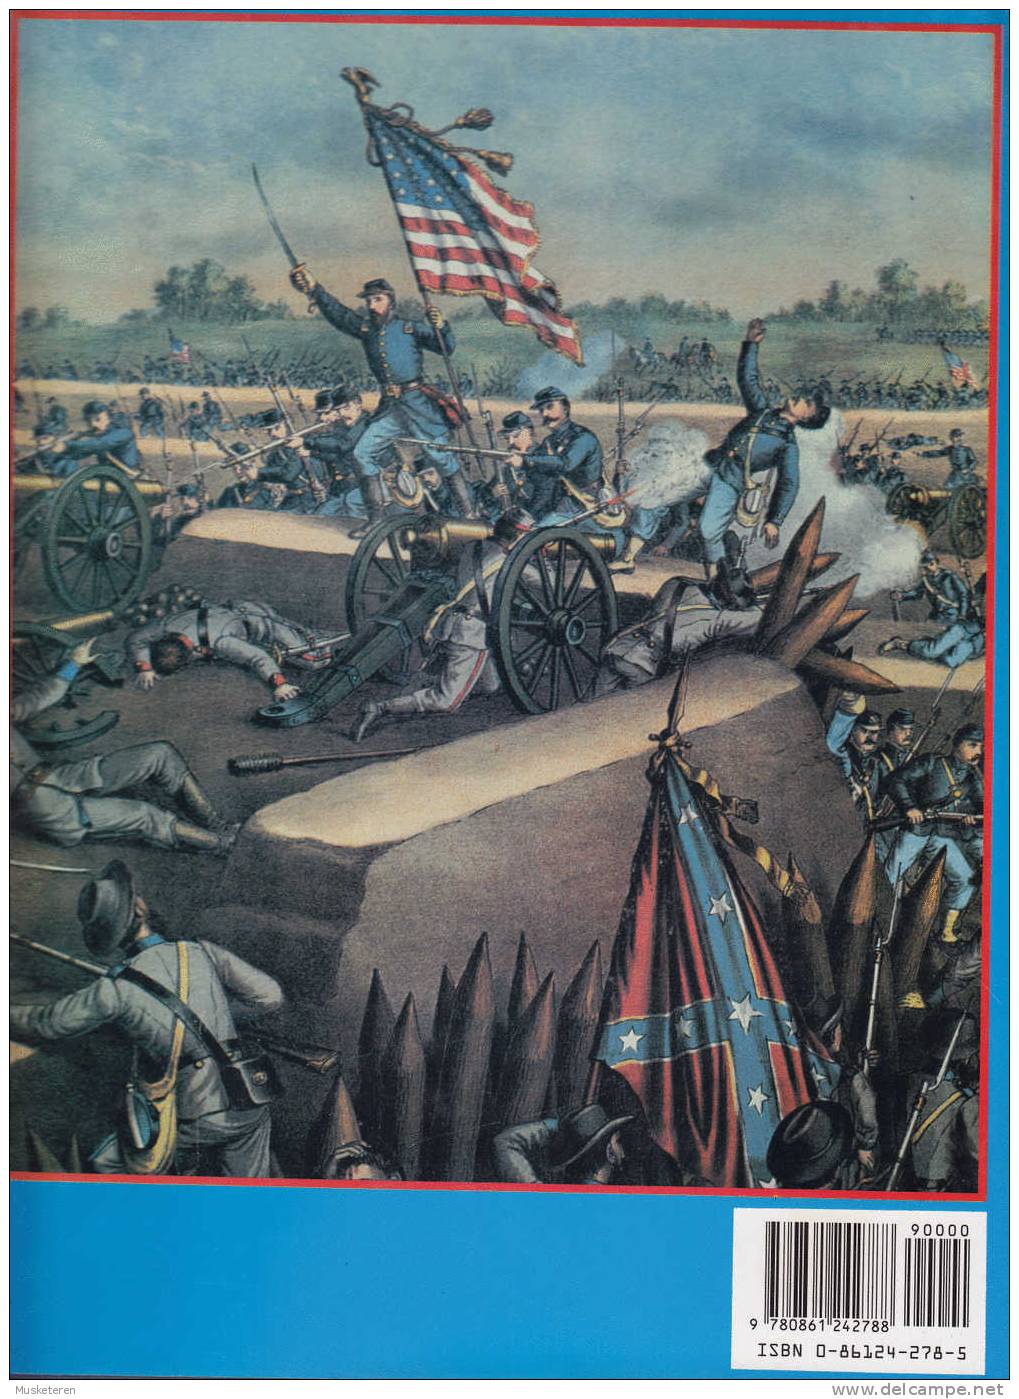 History Of The US ARMY By James M. Morris - US Army